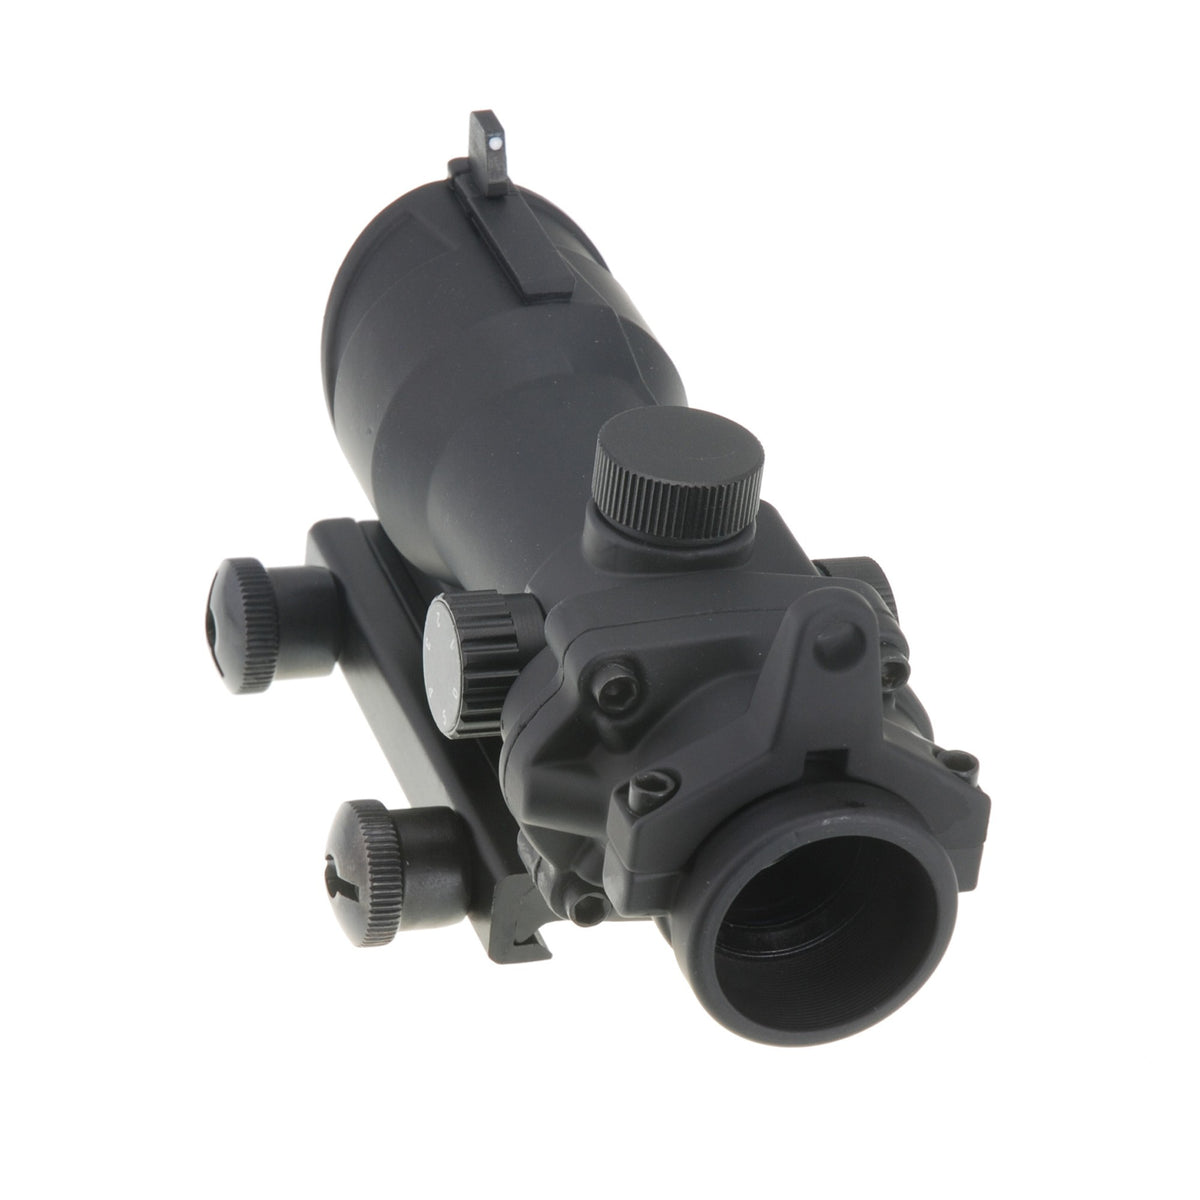 ACOG Style 1x32 Red Dot